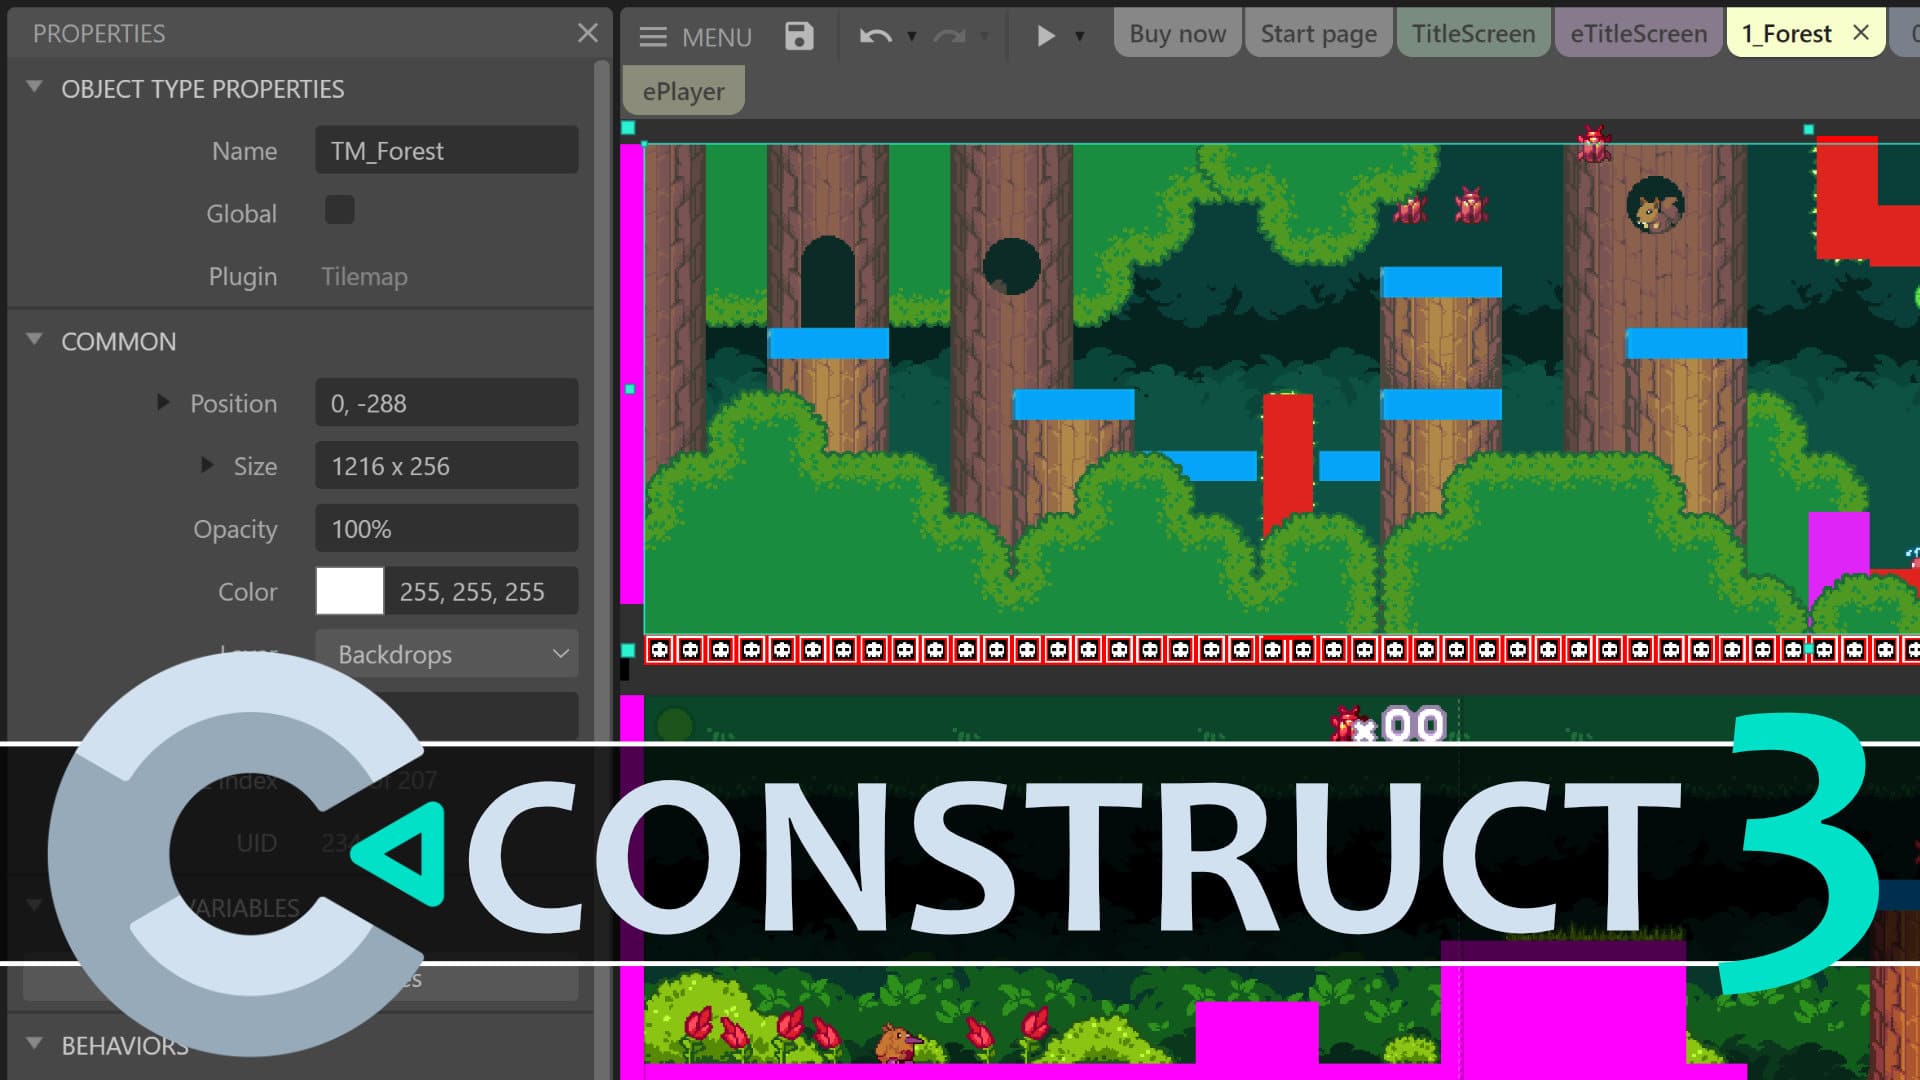 Games Editor - Create Games with Construct 3